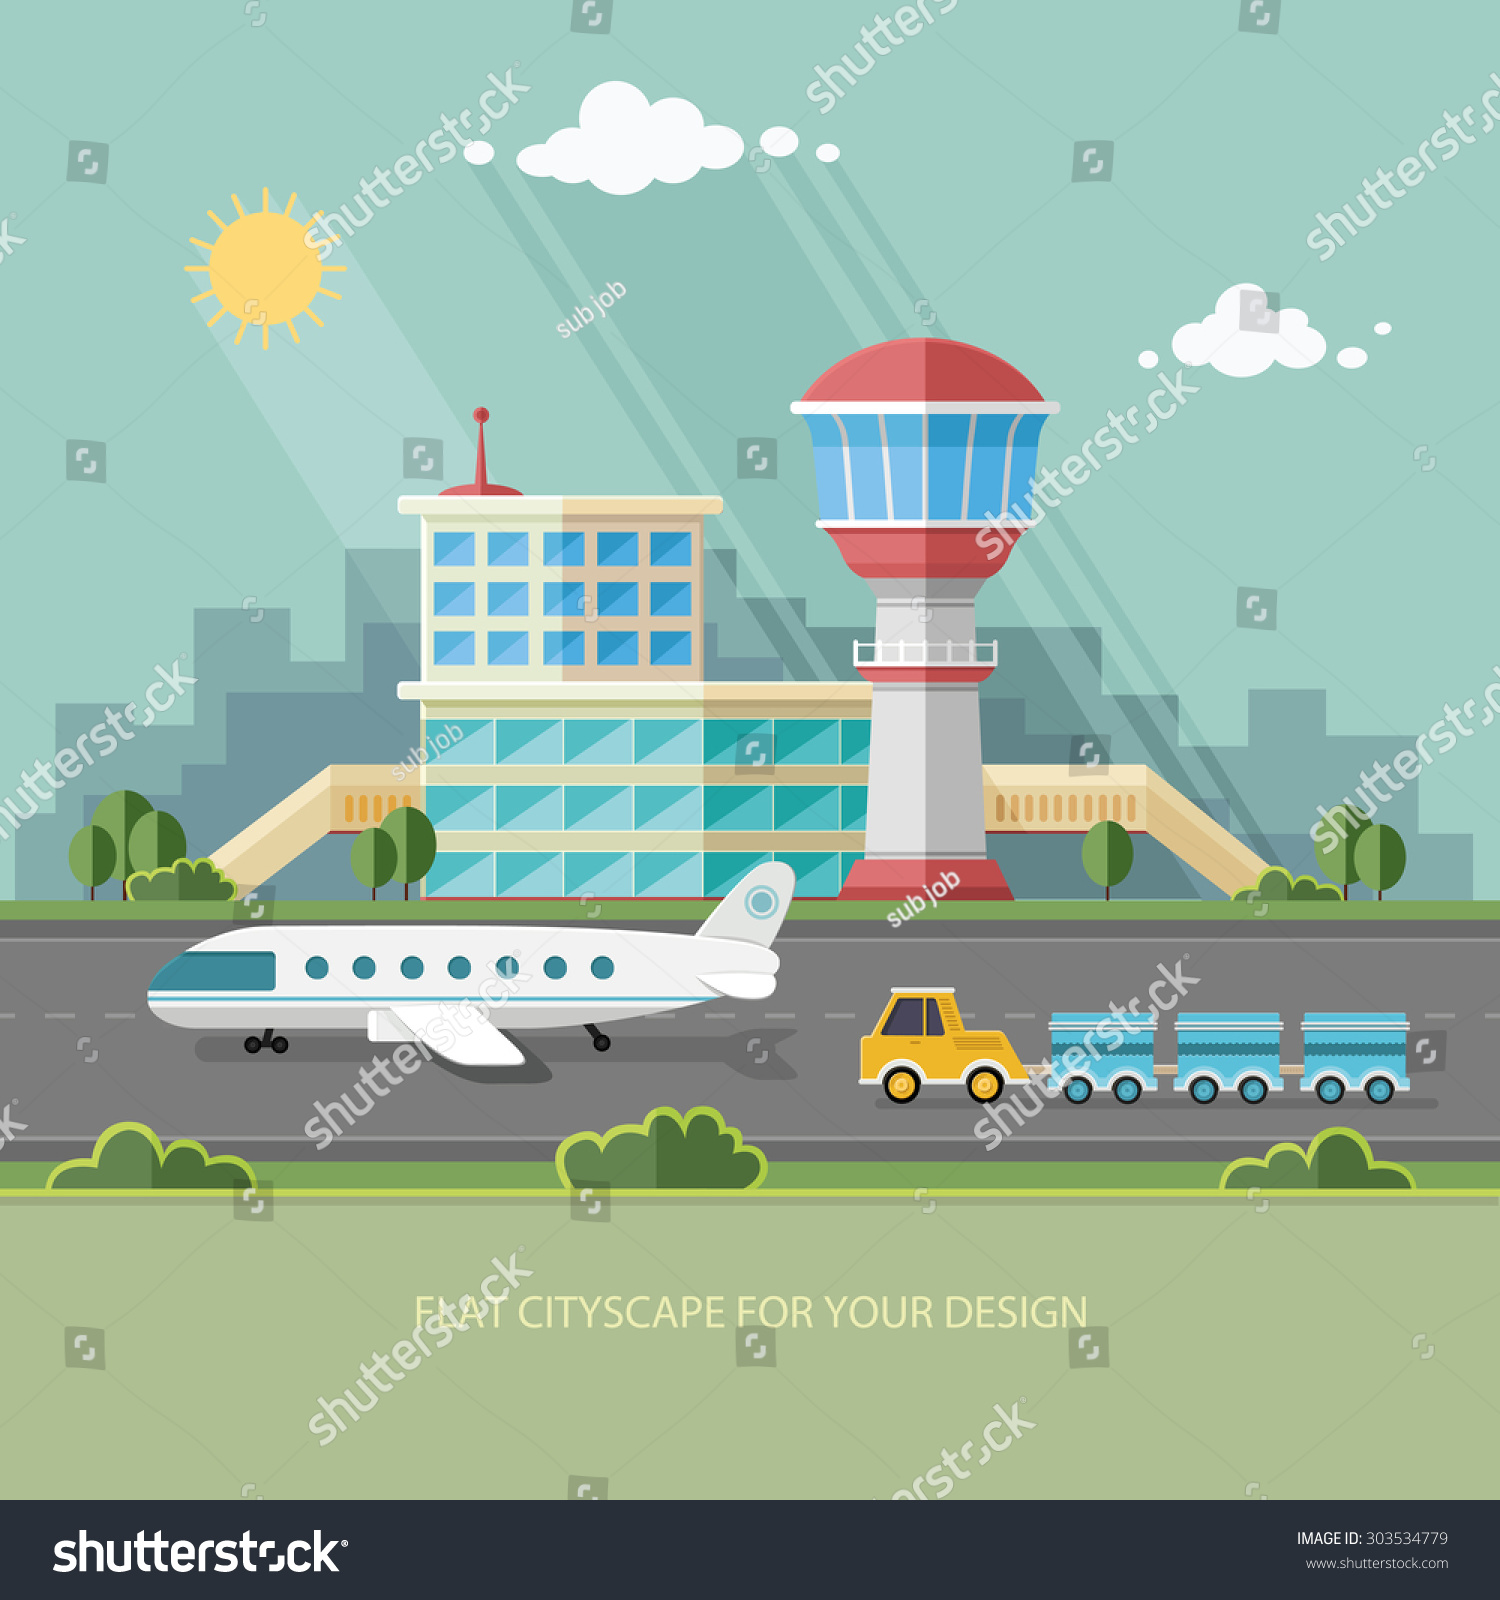 airport safety clipart - photo #15